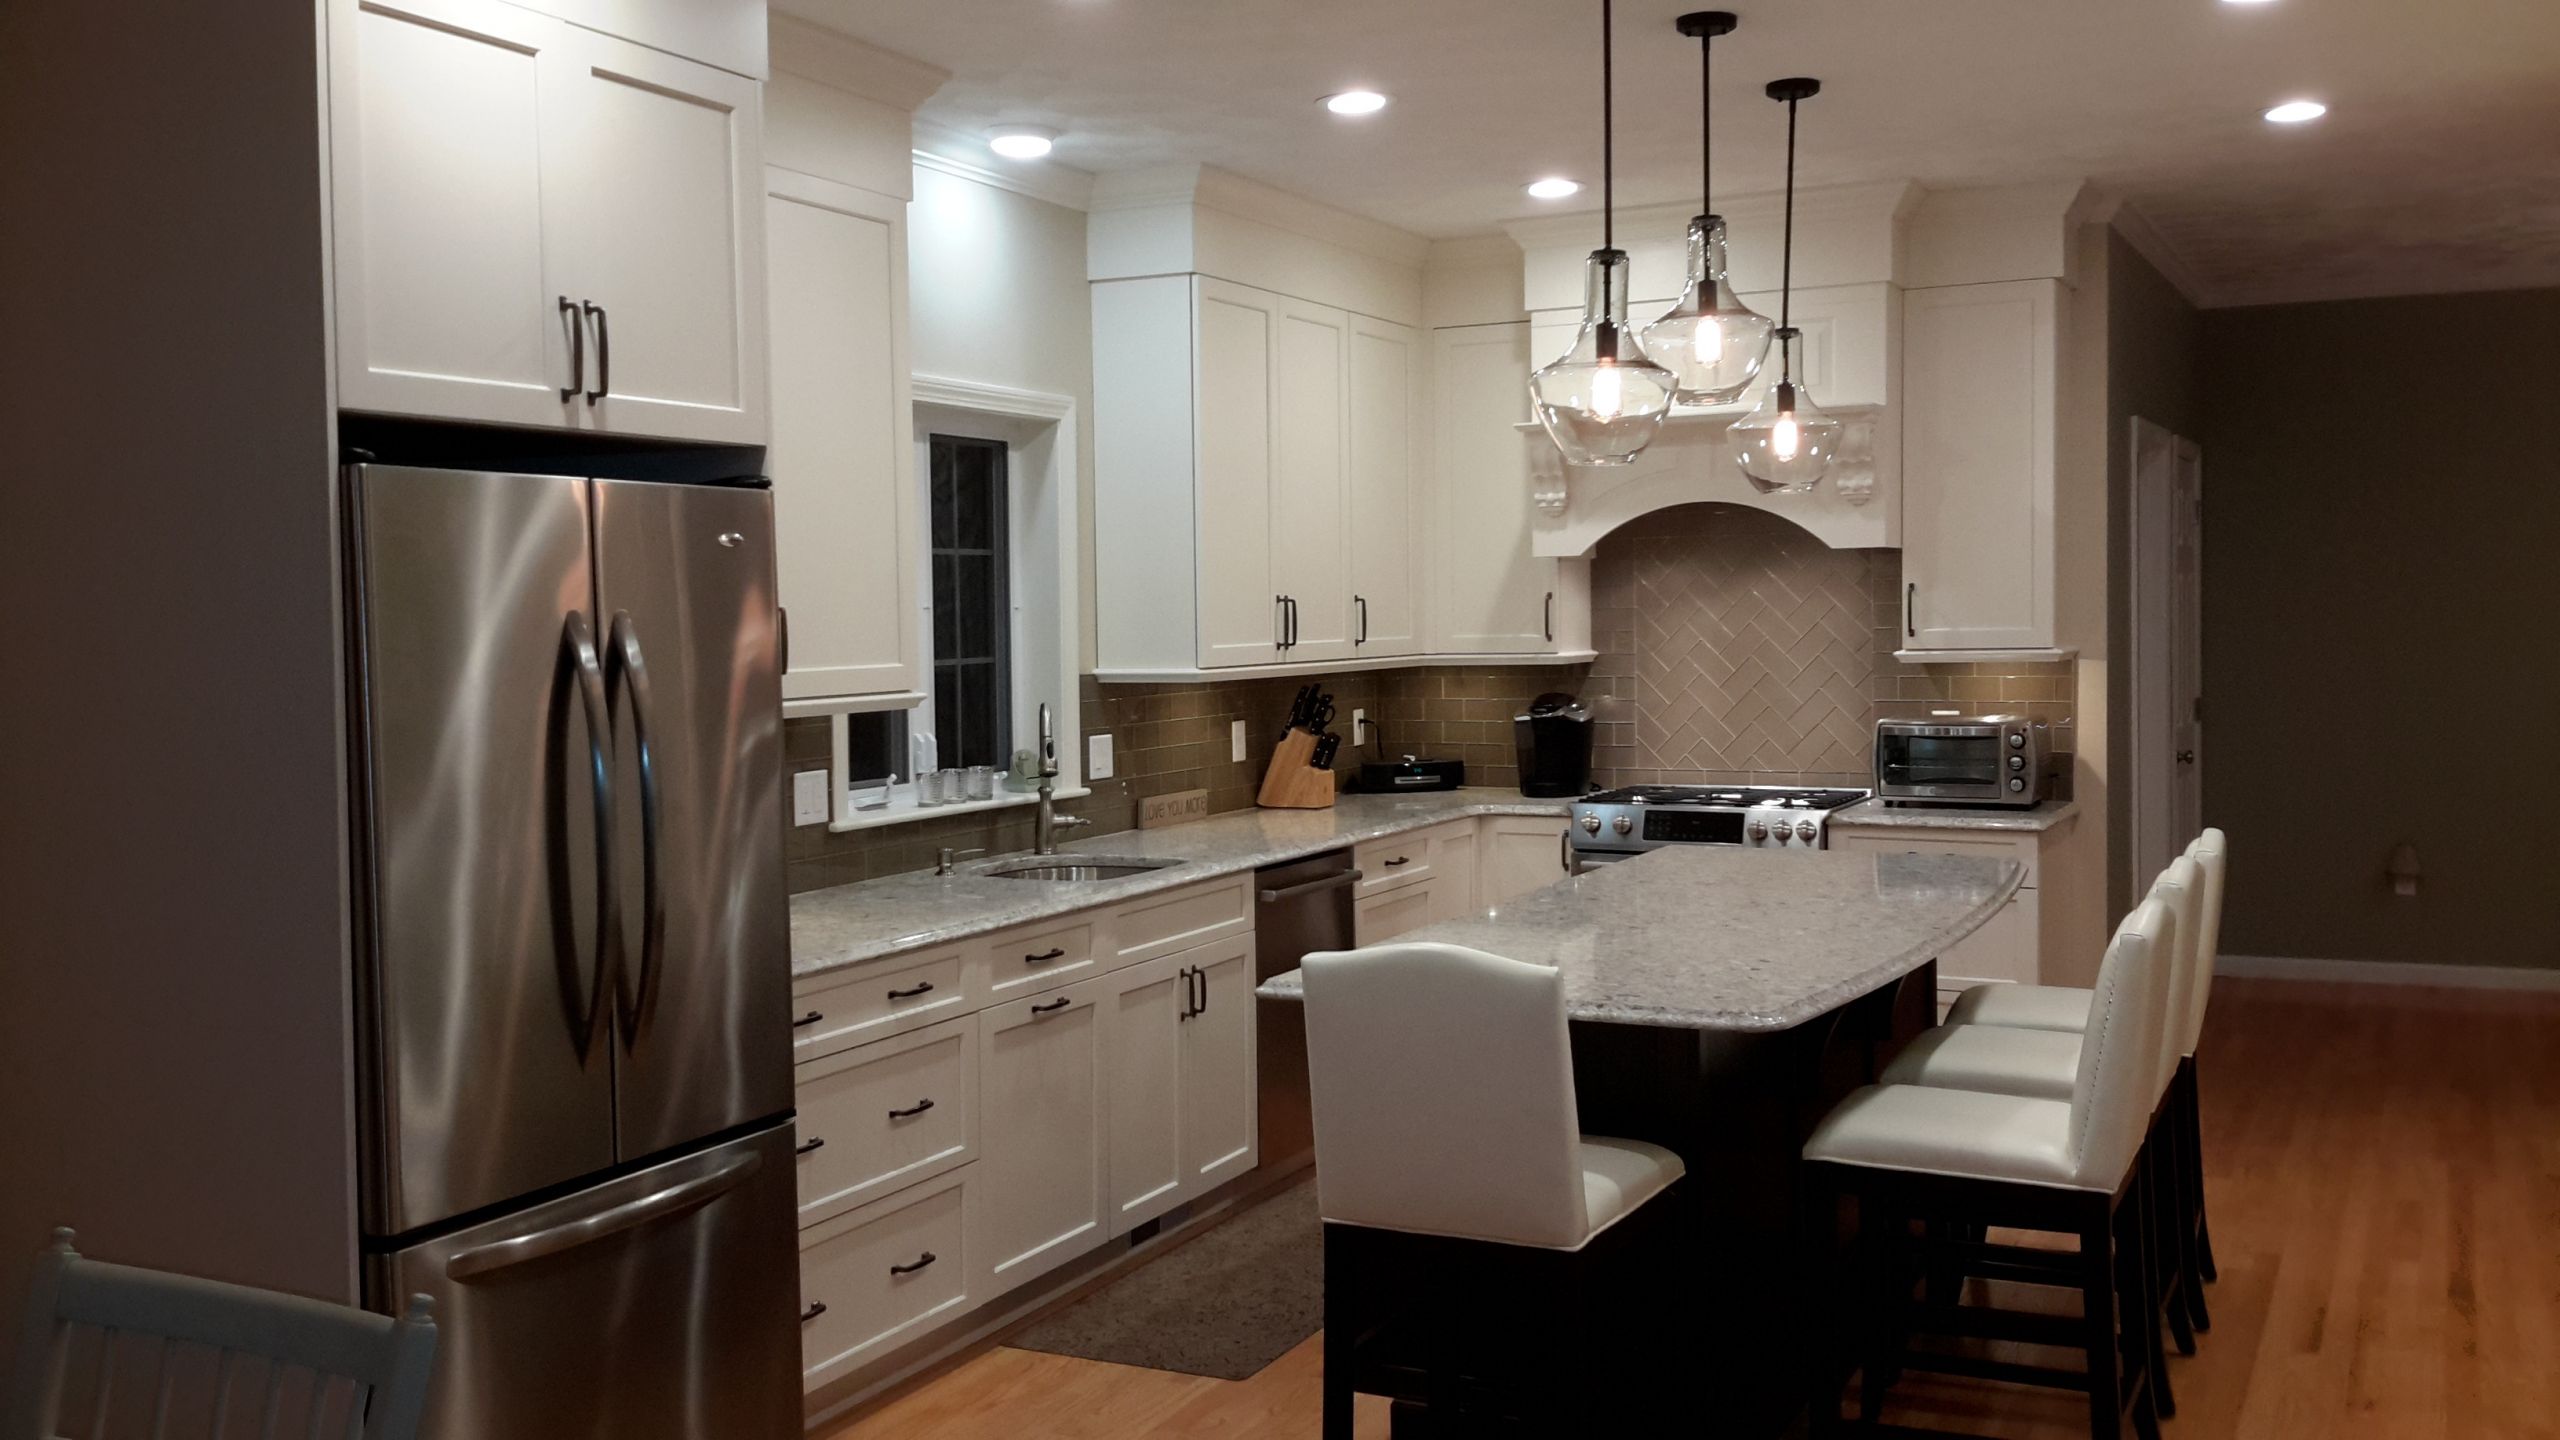 Kitchen And Bath Remodel
 Kitchen and Bath Remodeling Project Gallery SRB